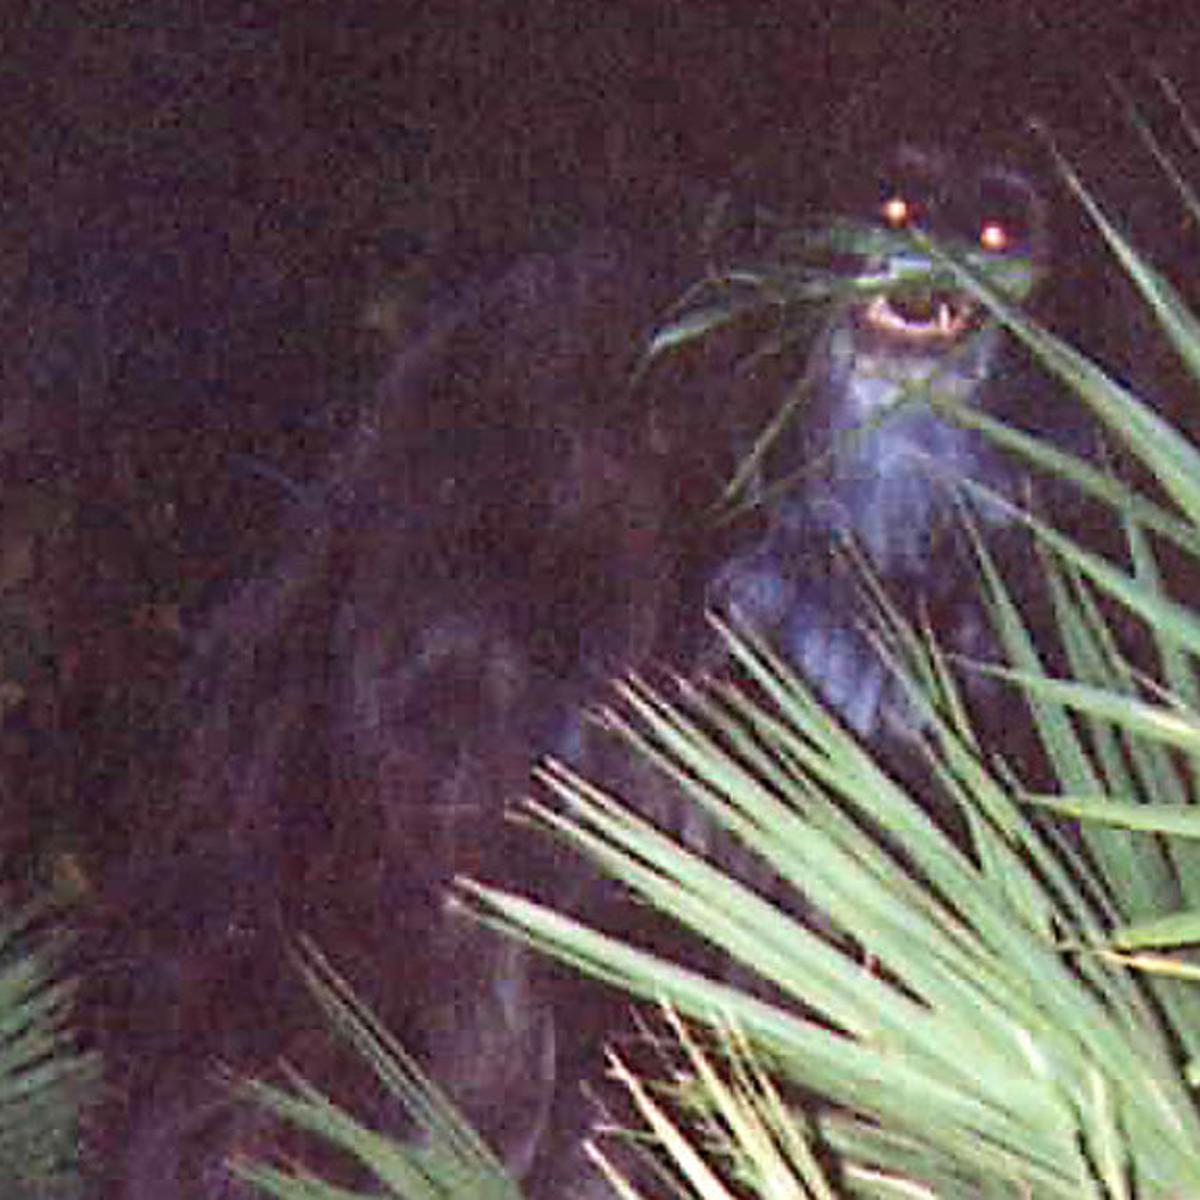 Florida is only known for its sightings of what's called the "skunk ape" -- an upright humanoid creature known for smelling like rotten eggs. It's also claimed by AR, NC, and AL, but the vast majority of sightings are Florida.